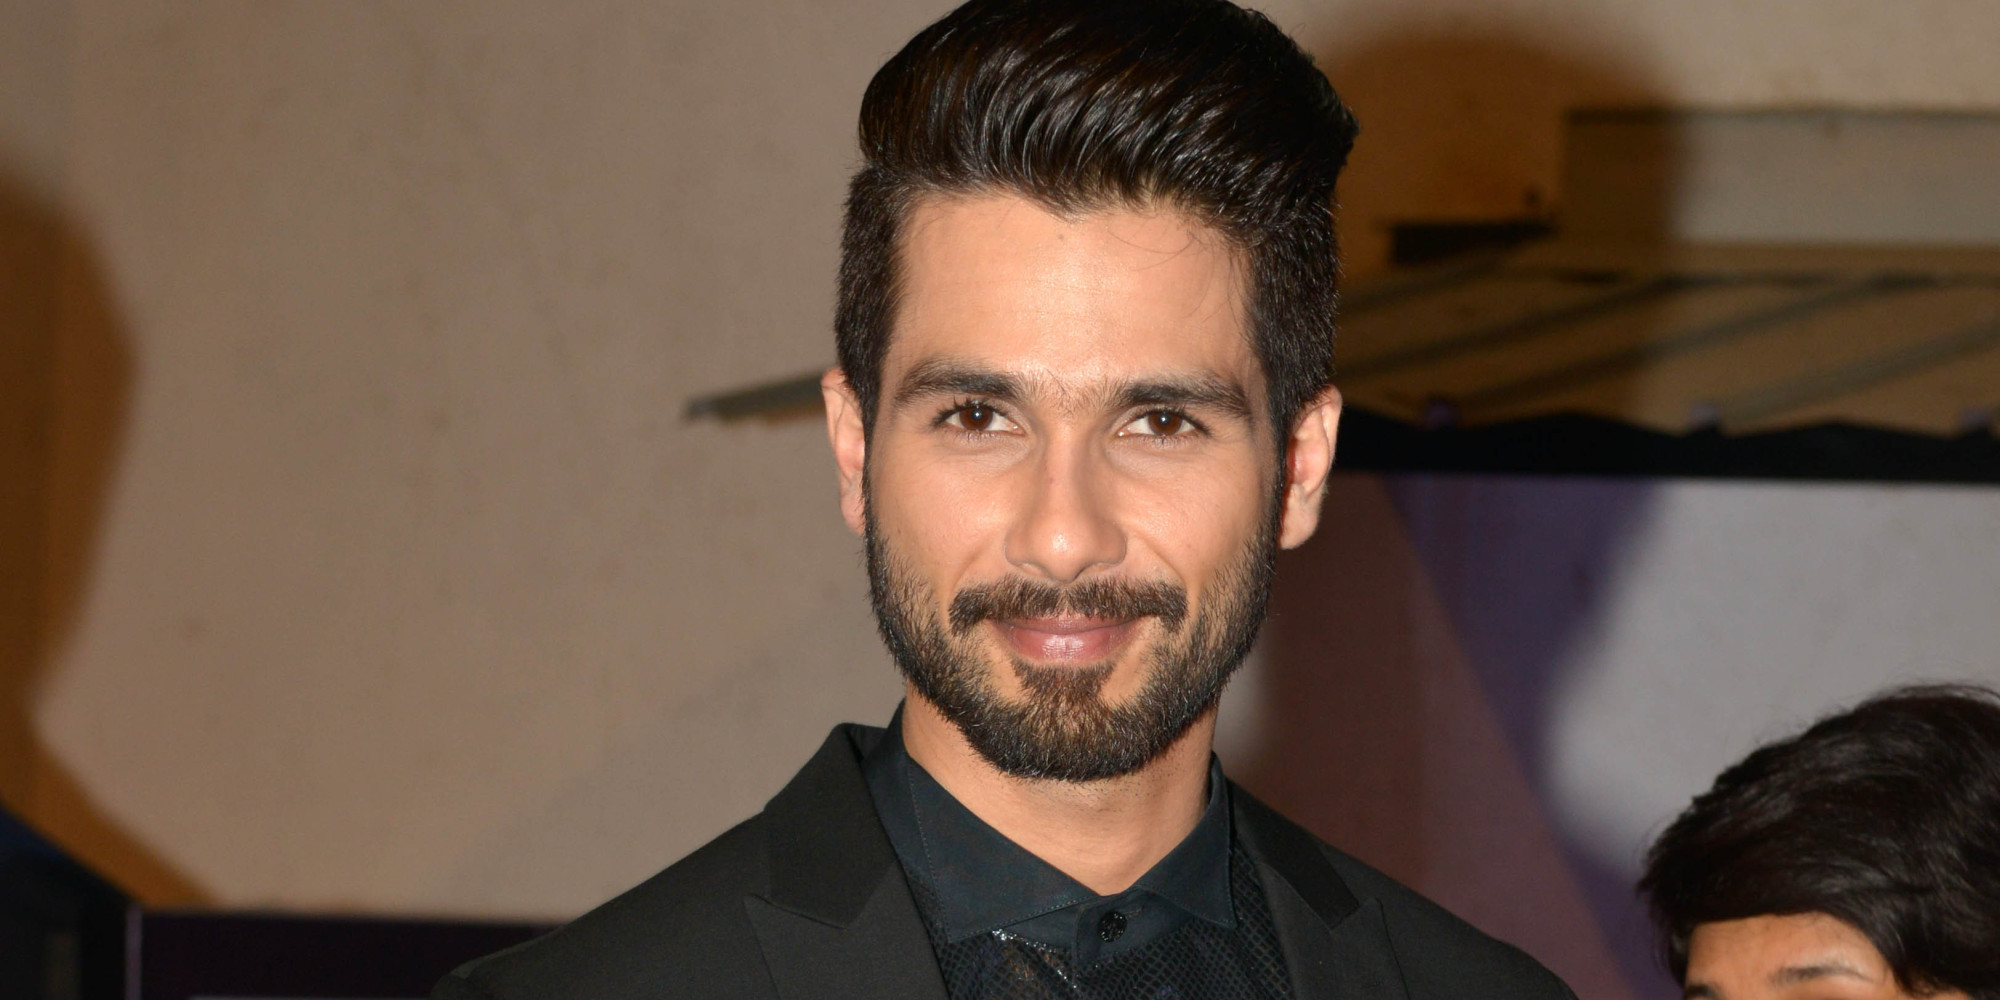 Shahid Kapoor Awesome Hair style Pics Wallpaper, HD Celebrities 4K  Wallpapers, Images and Background - Wallpapers Den